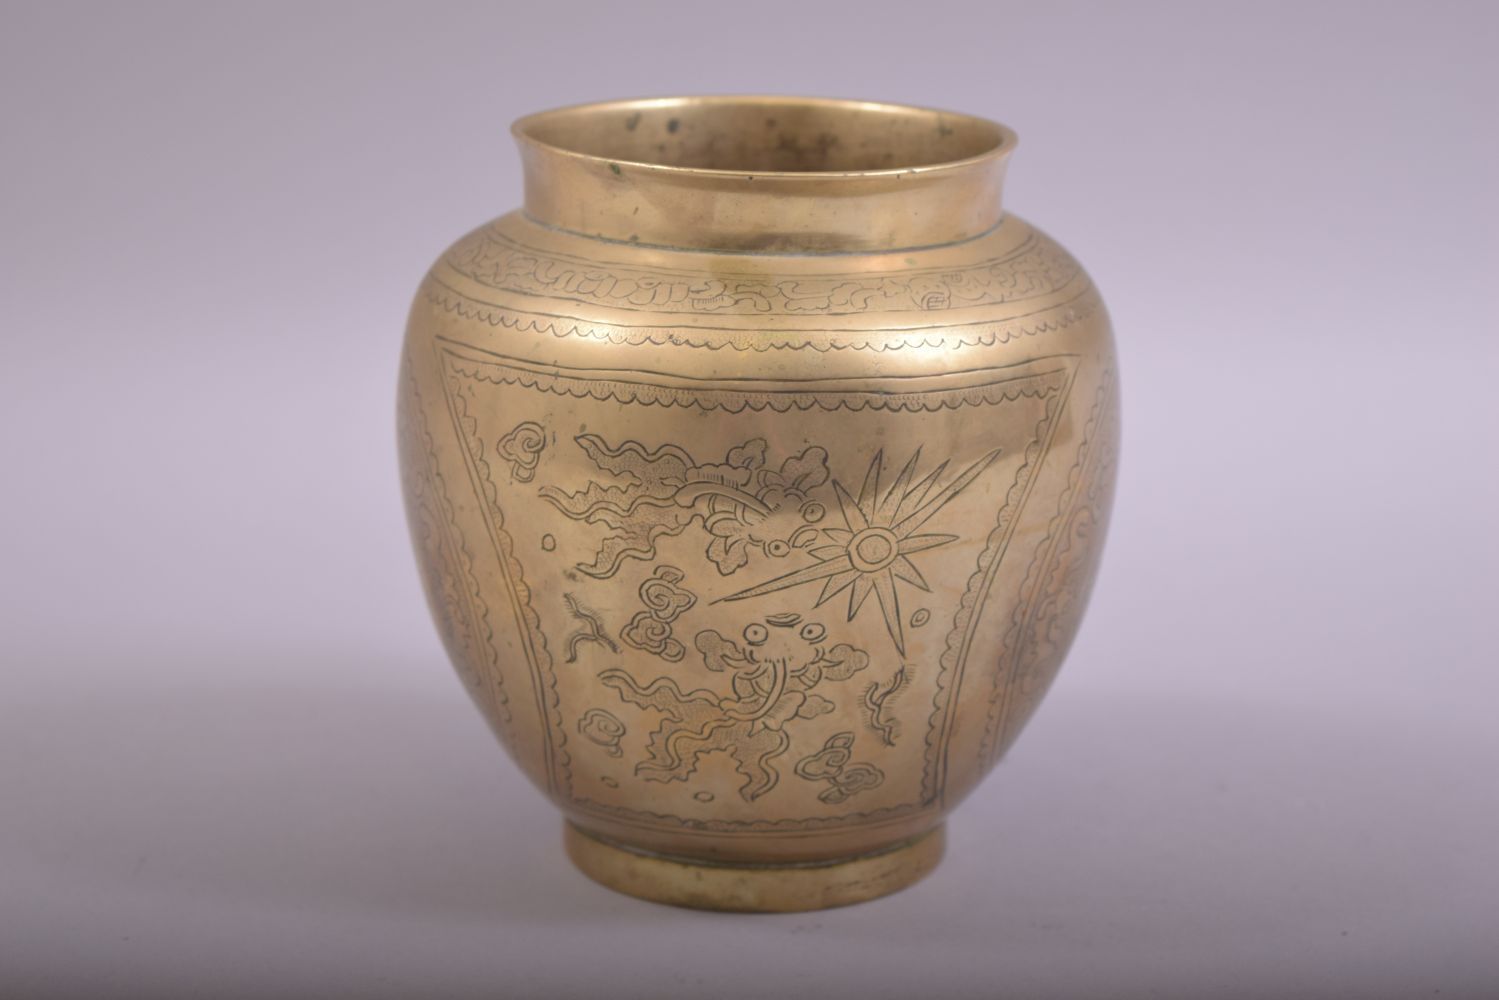 A SMALL CHINESE BRONZE VASE, with engraved decoration depicting two roundel emblems and panels of - Image 2 of 7